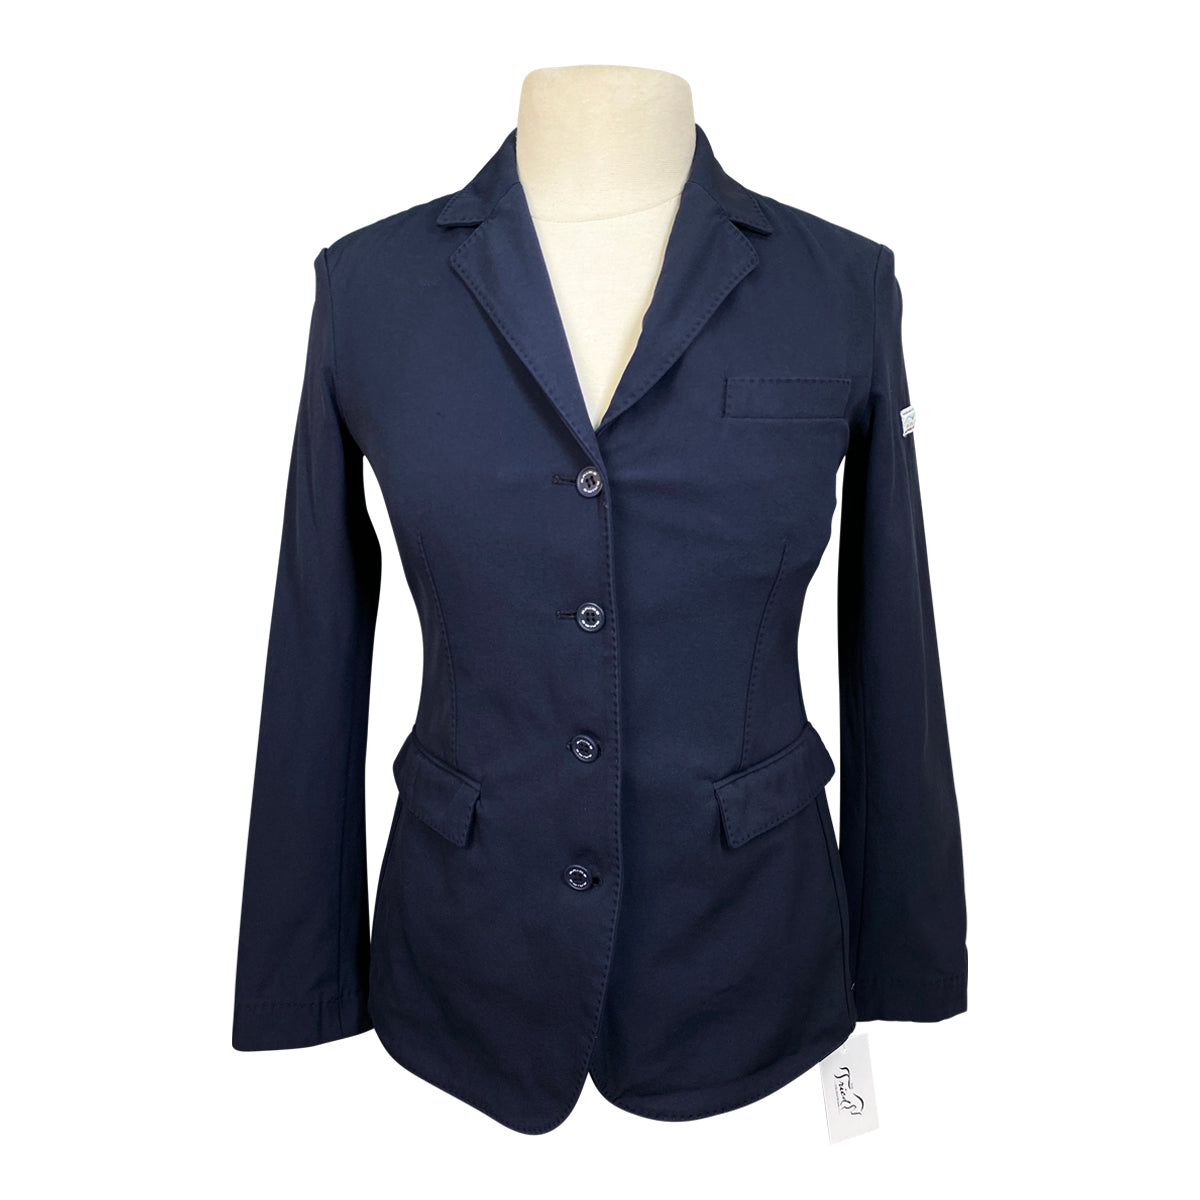 Animo Competition Jacket in Navy